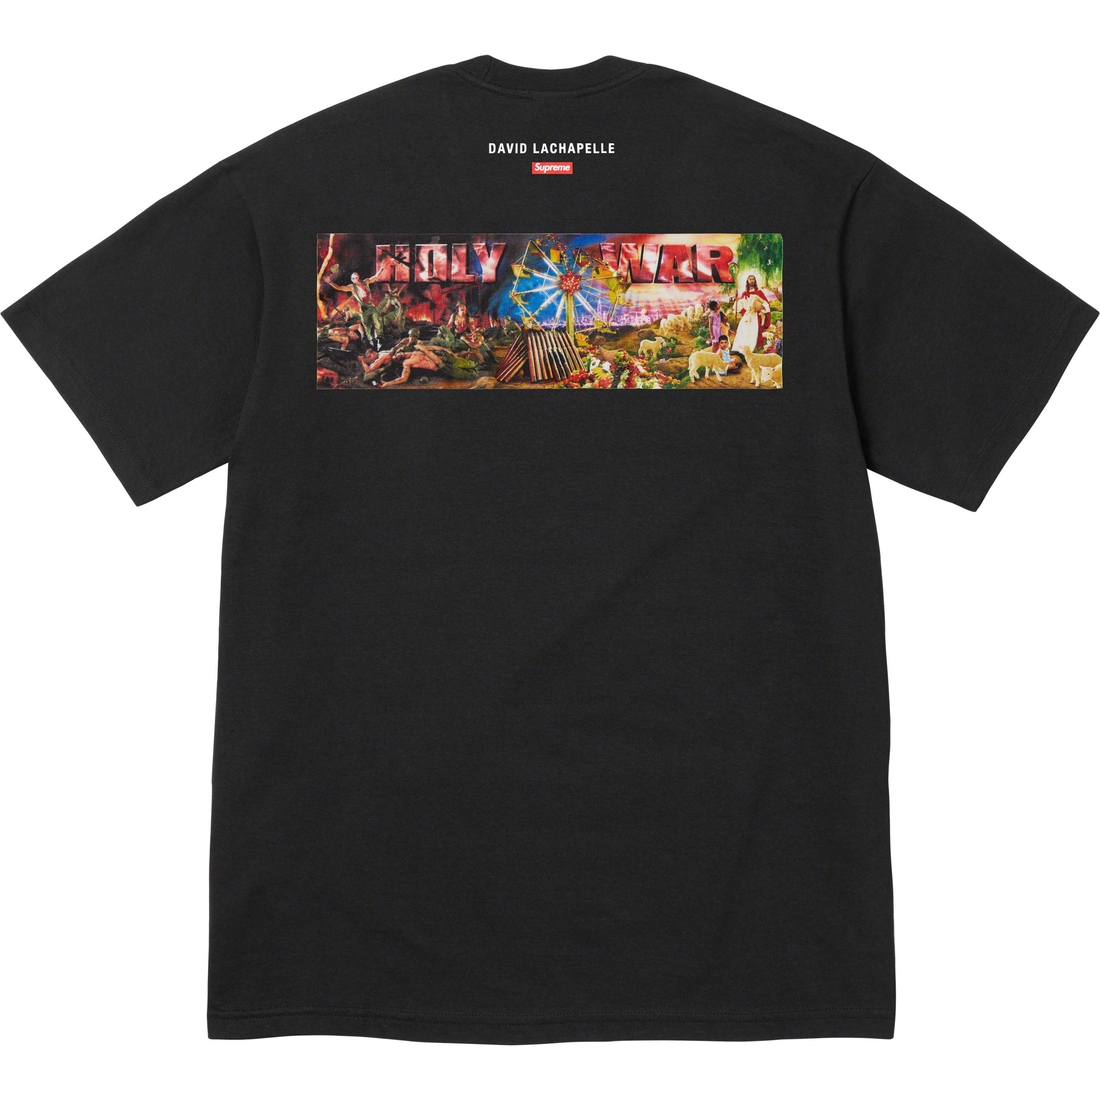 Details on Holy War Tee Black from fall winter
                                                    2023 (Price is $48)